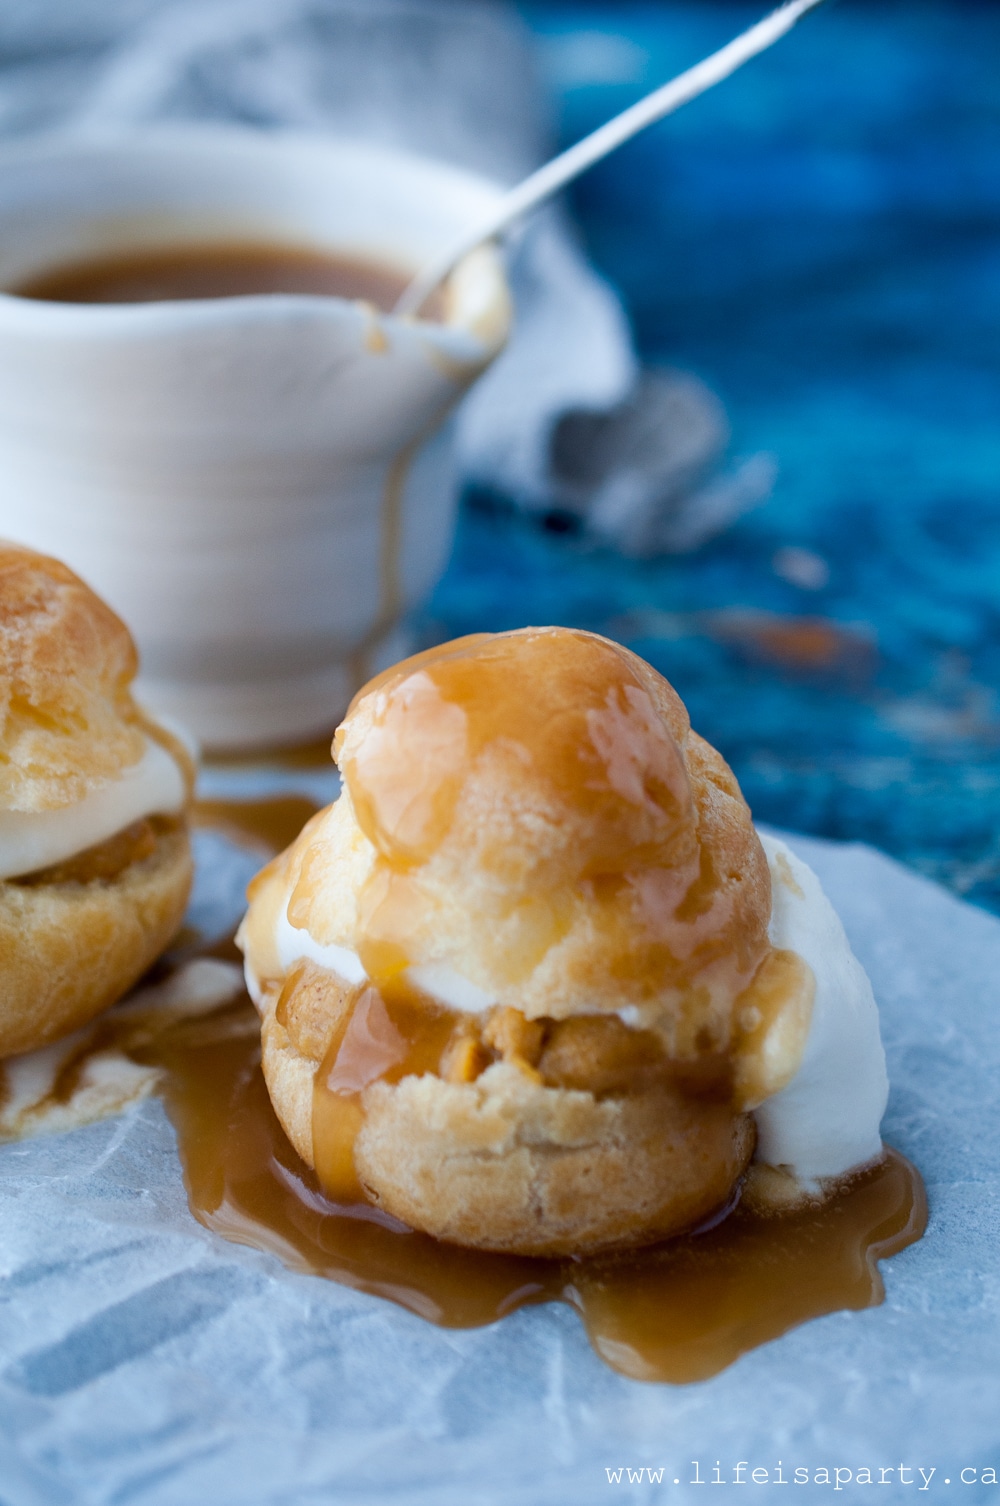 Pumpkin Cream Puffs: A cream puff filled with pumpkin pastry cream, whipped cream, and topped with warm caramel sauce for the perfect fall dessert.